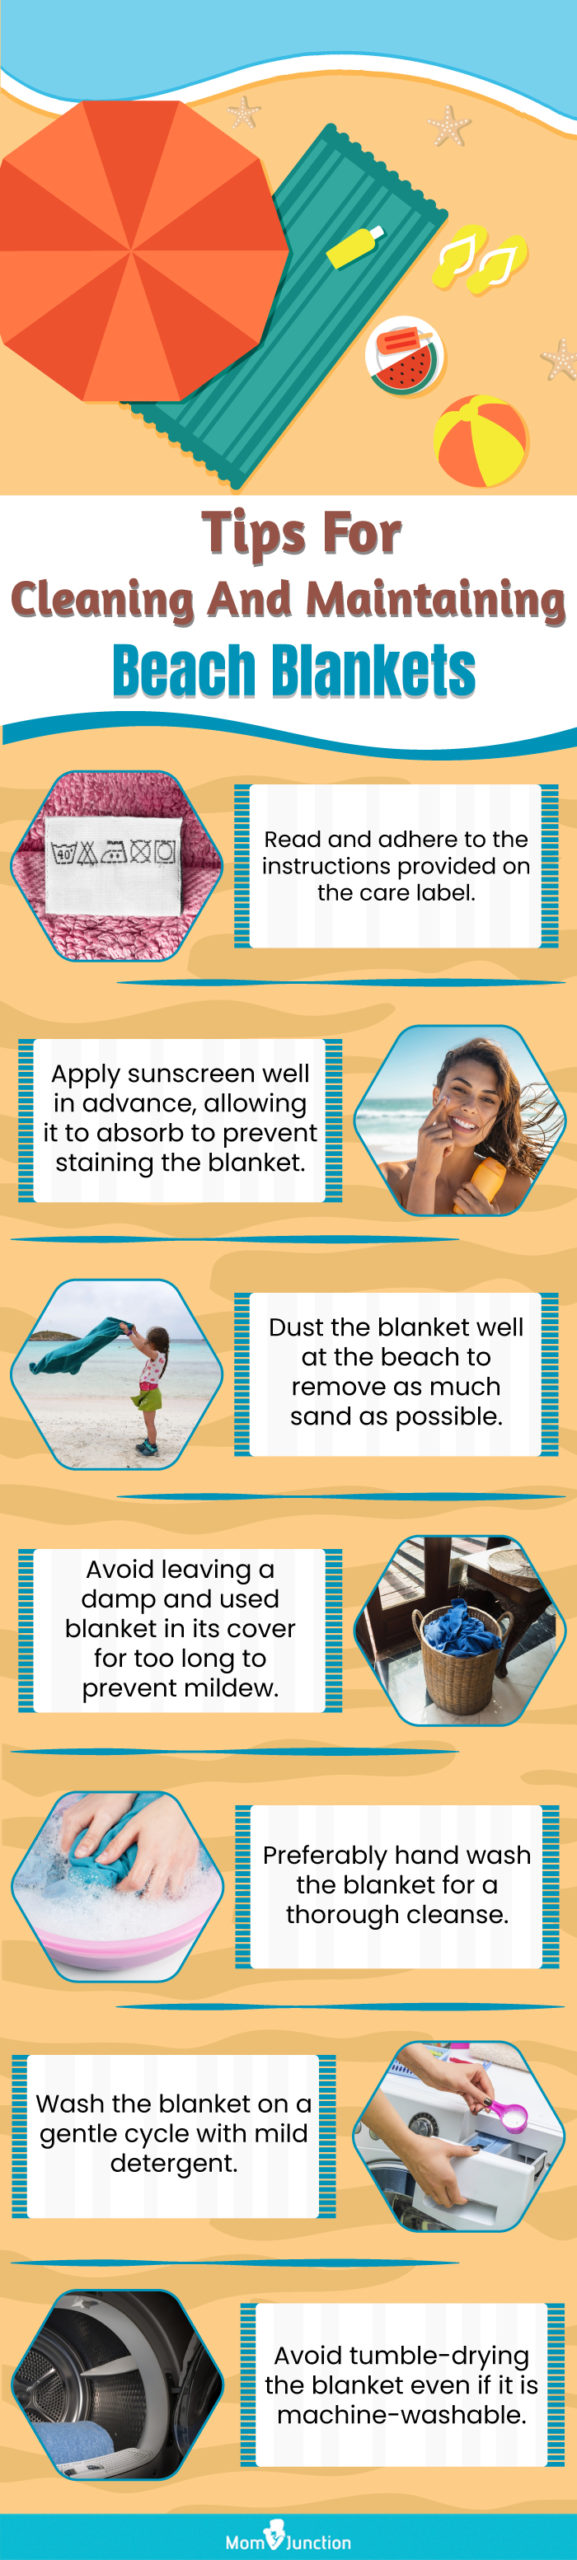 Tips For Cleaning And Maintaining Beach Blankets (infographic)